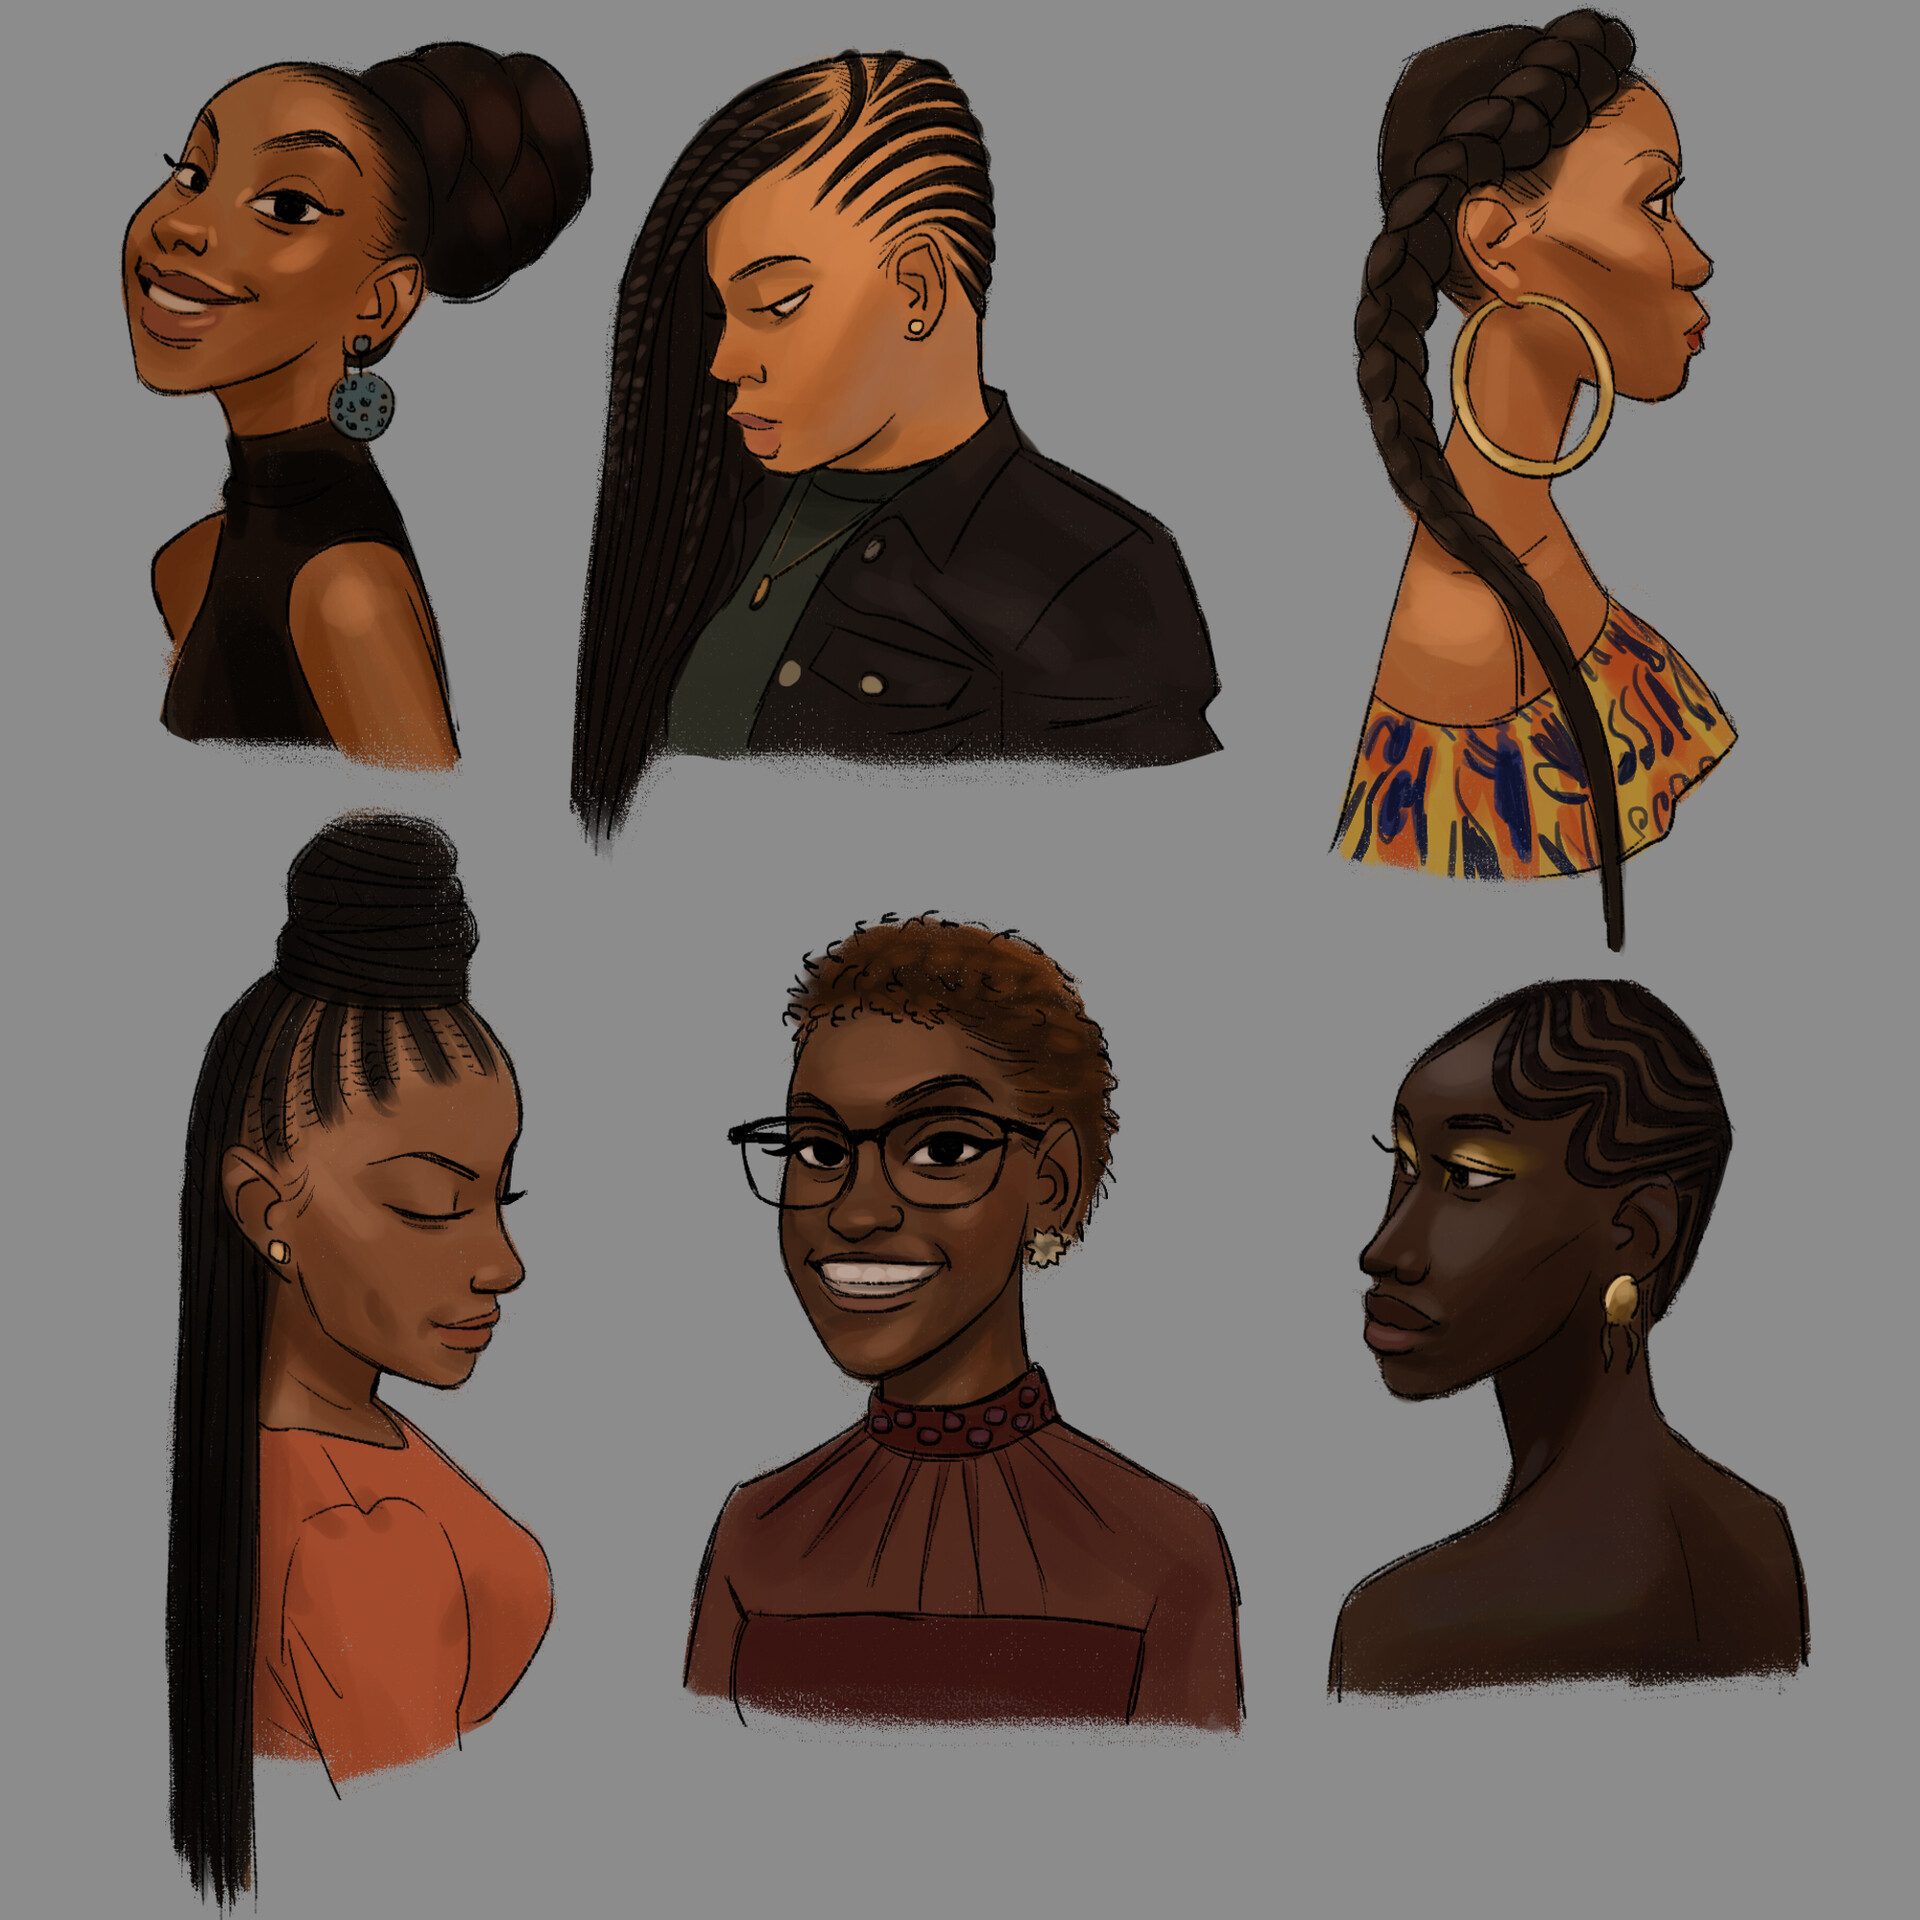 ArtStation - Sketch Collection of Black Hairstyles